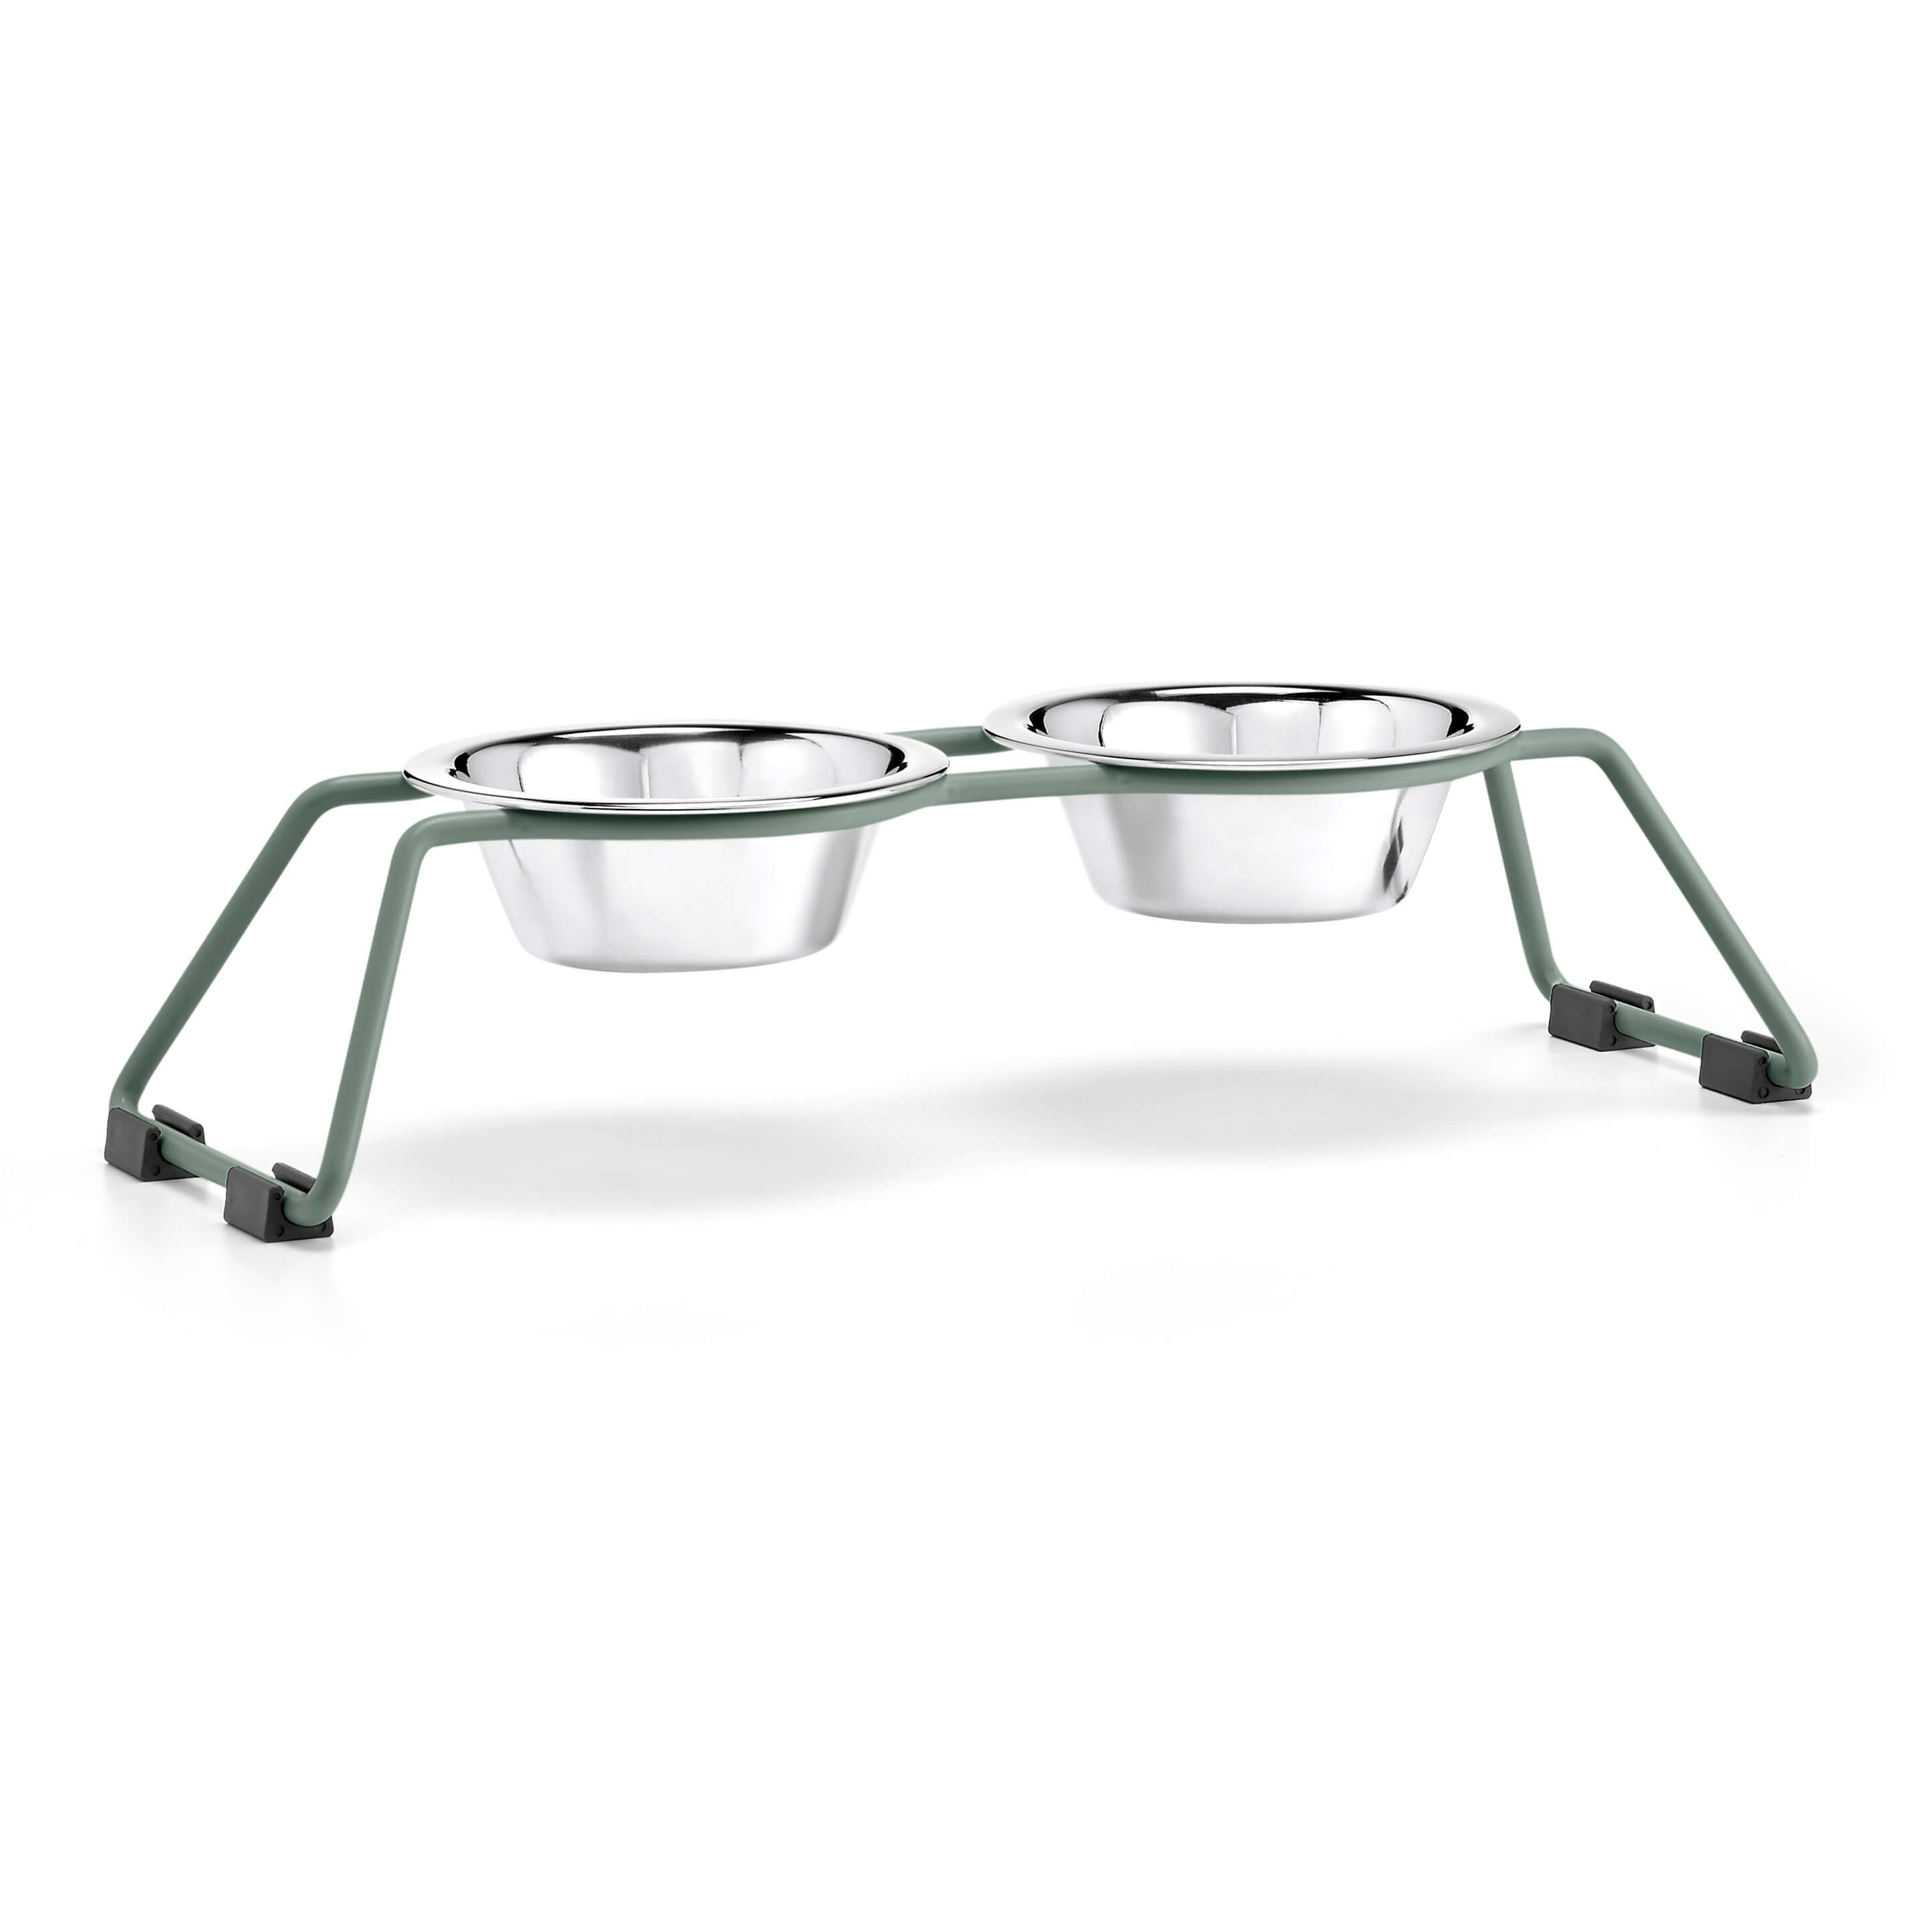 MiaCara Cena Dog Feeder Dusty Green available at The Good Pet Home